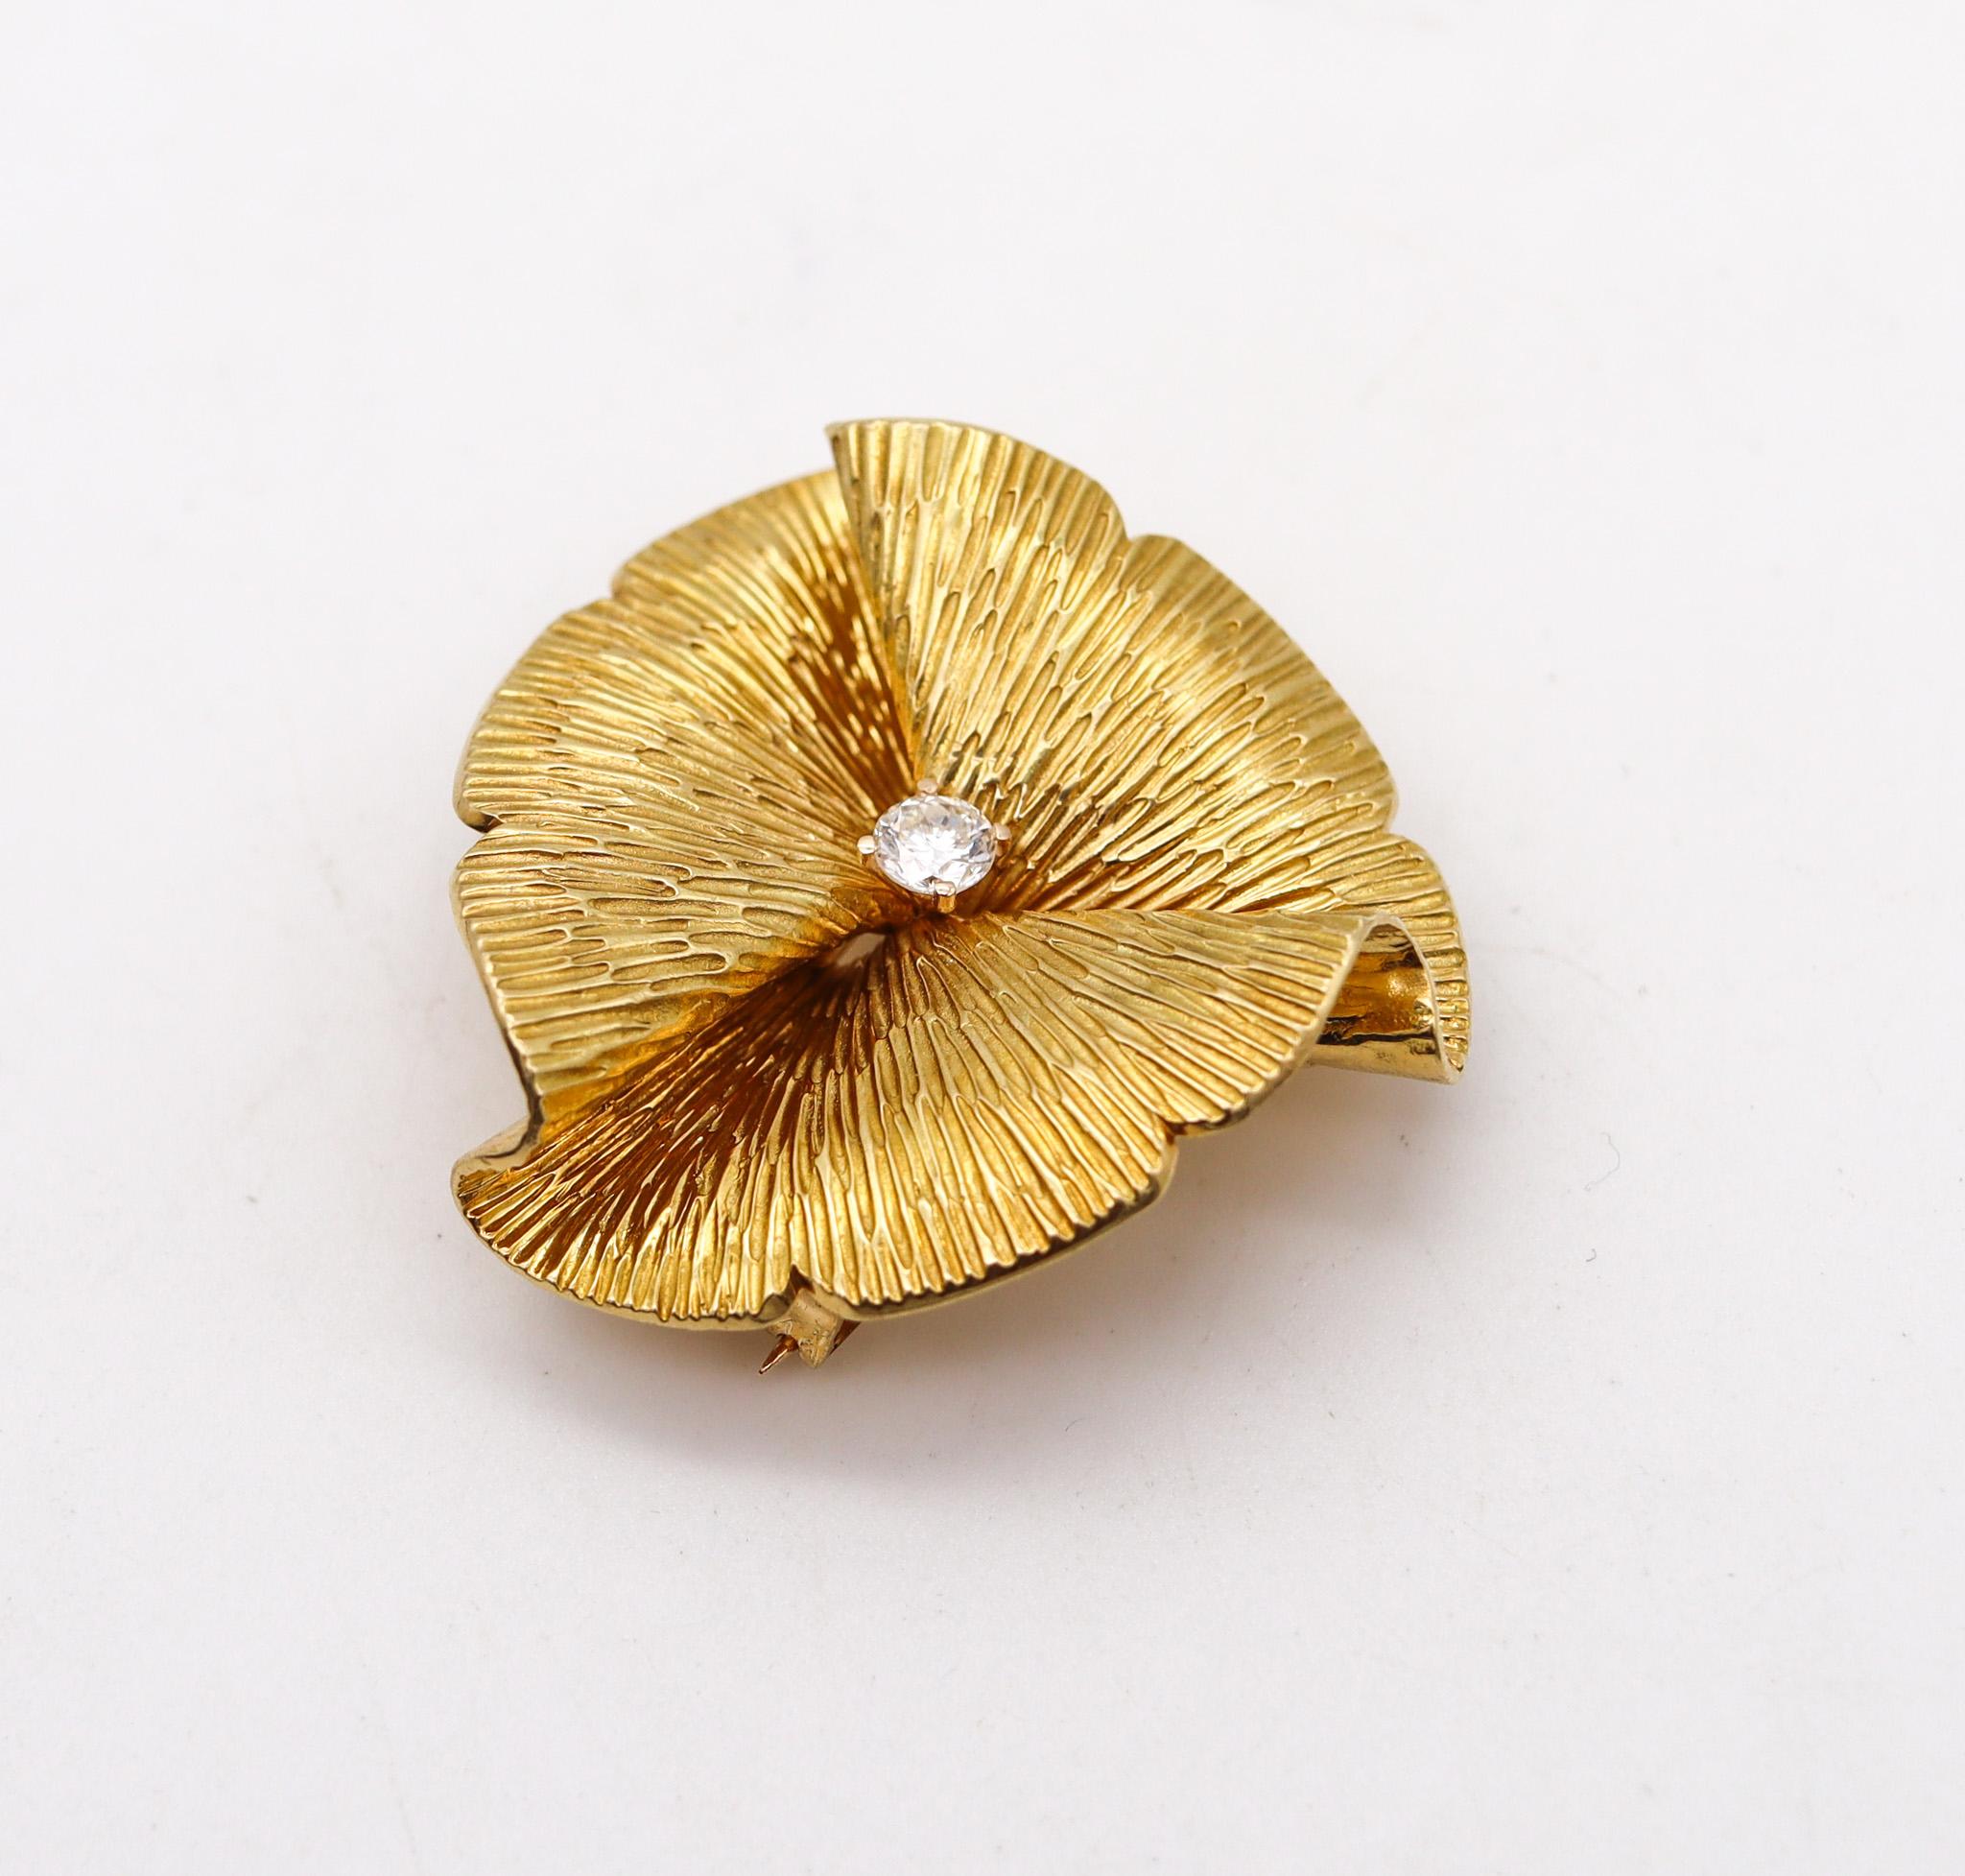 A textured brooch designed by Cartier.

Very beautiful brooch, created in New York city by George Schuler for the jewelry house of Cartier, back in the 1950-1960. This modernist folding wavy brooch has been crafted in solid rich yellow gold of 18